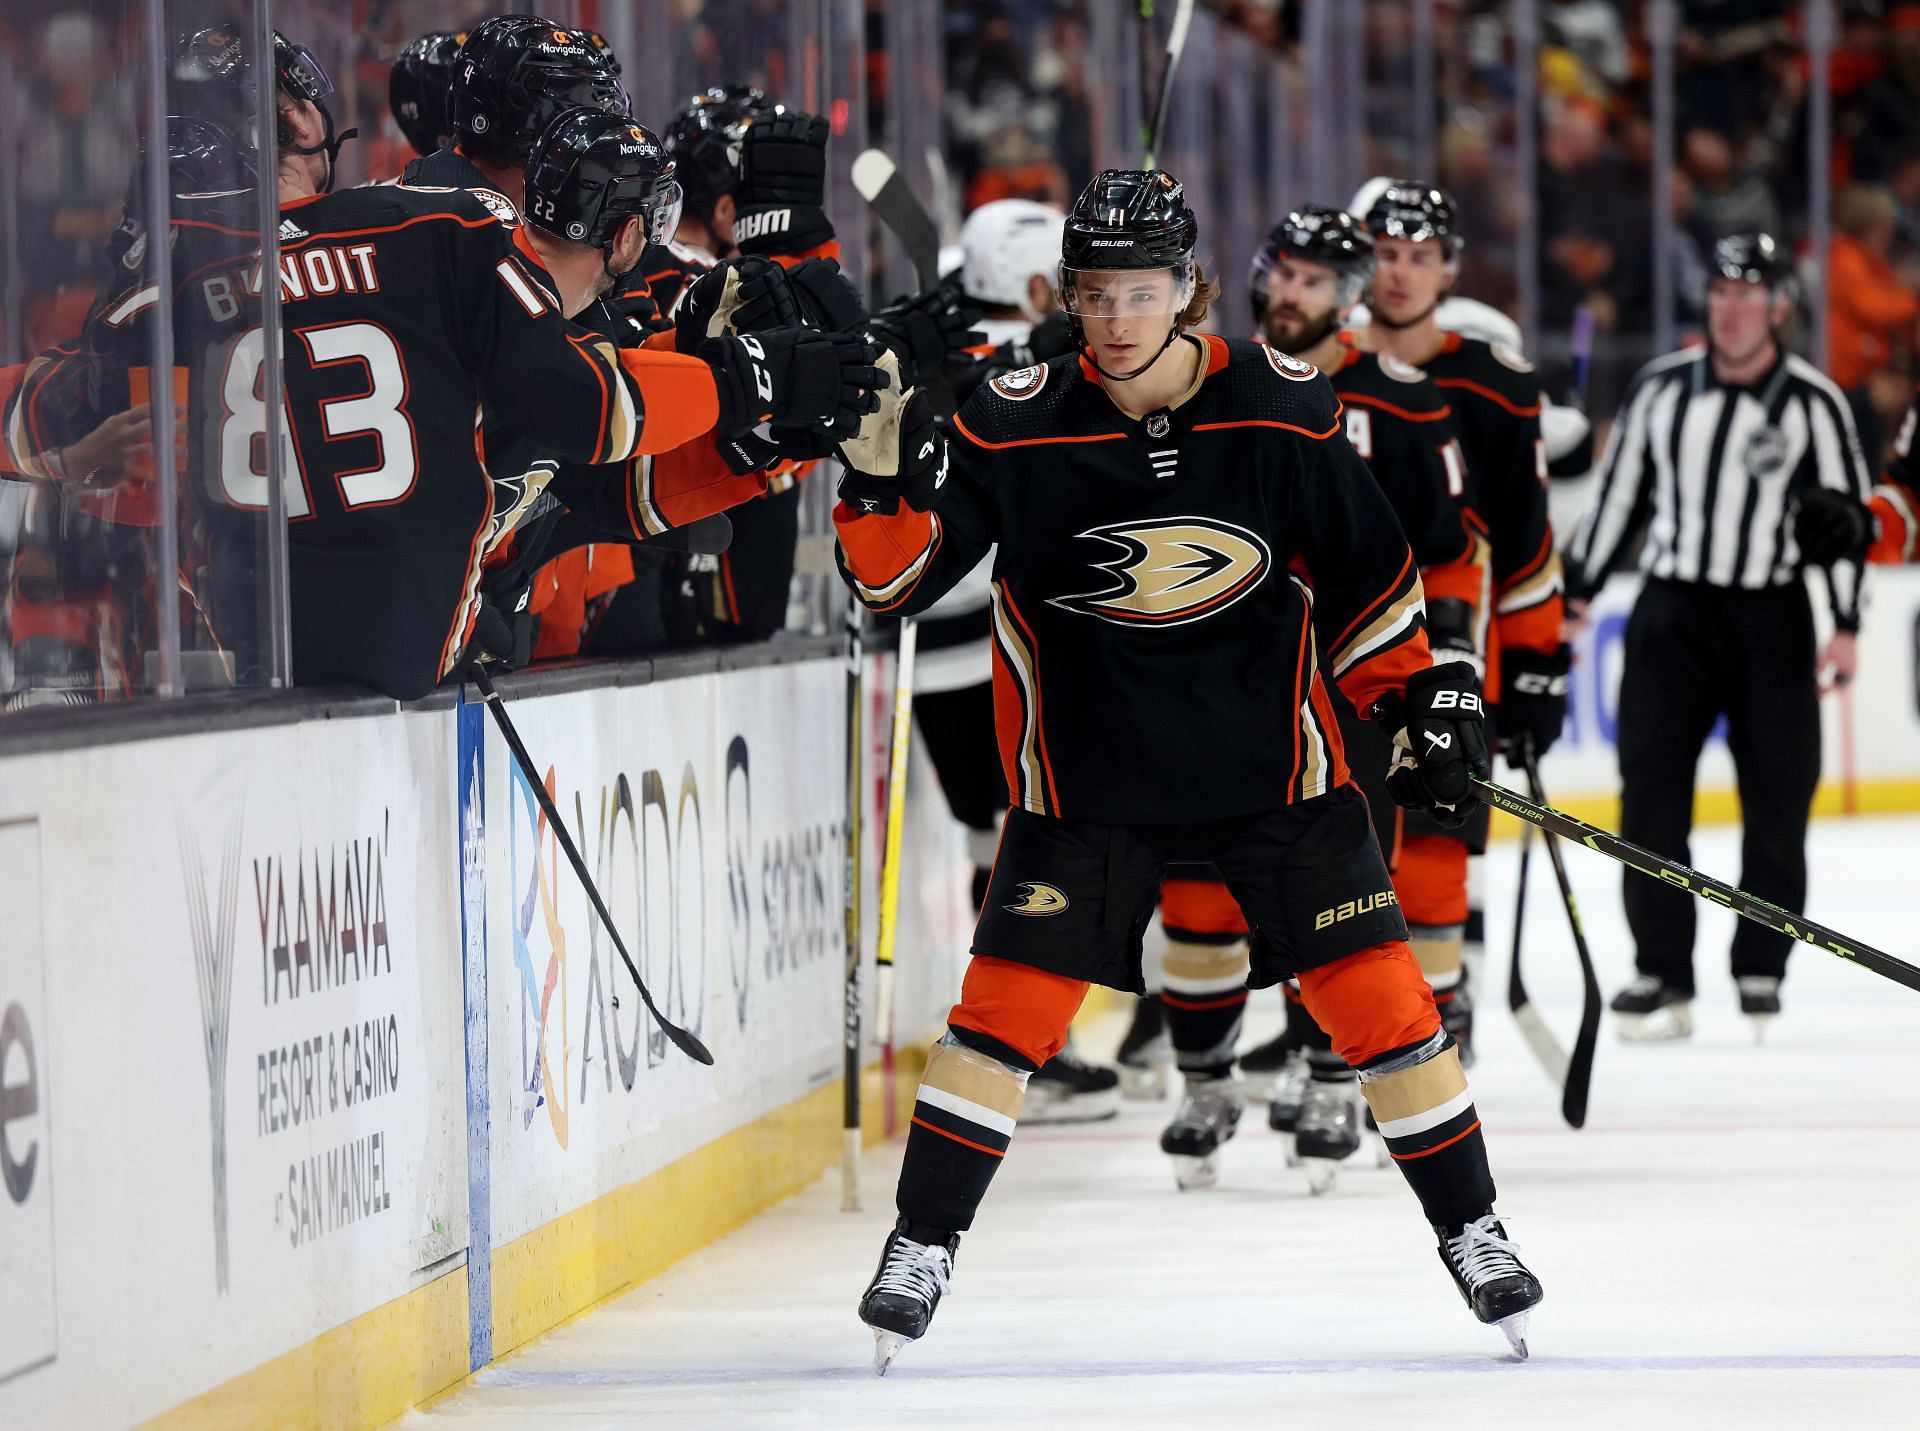 Anaheim has a young core